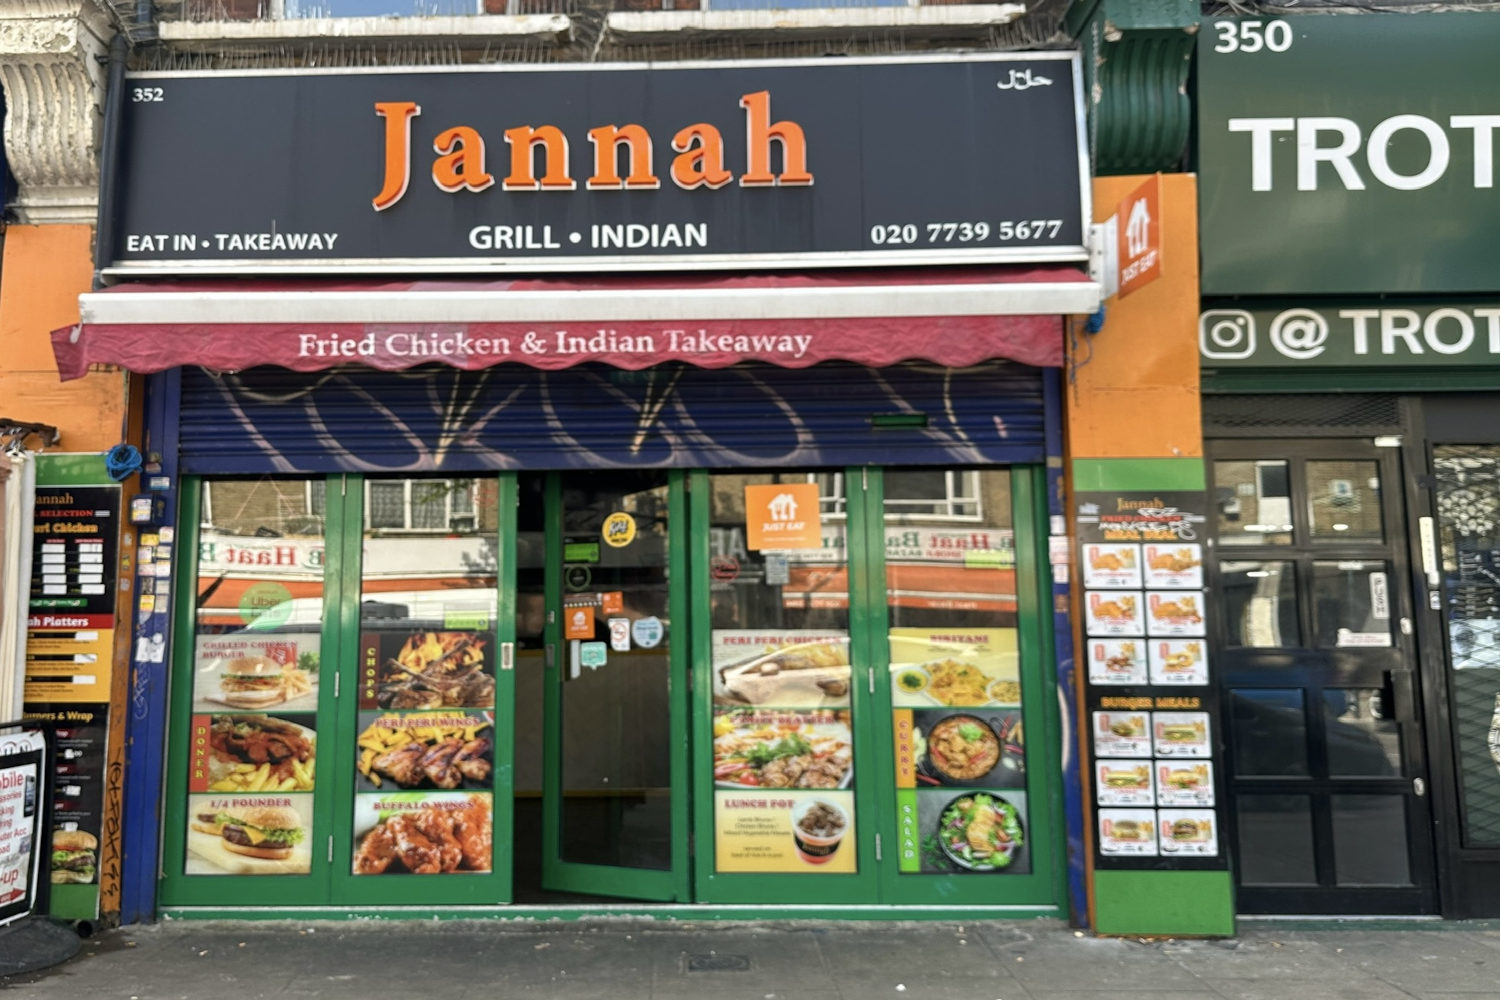 Jannah Grill shop front with bright orange lettering and menu leaflets stuck onto the windows.